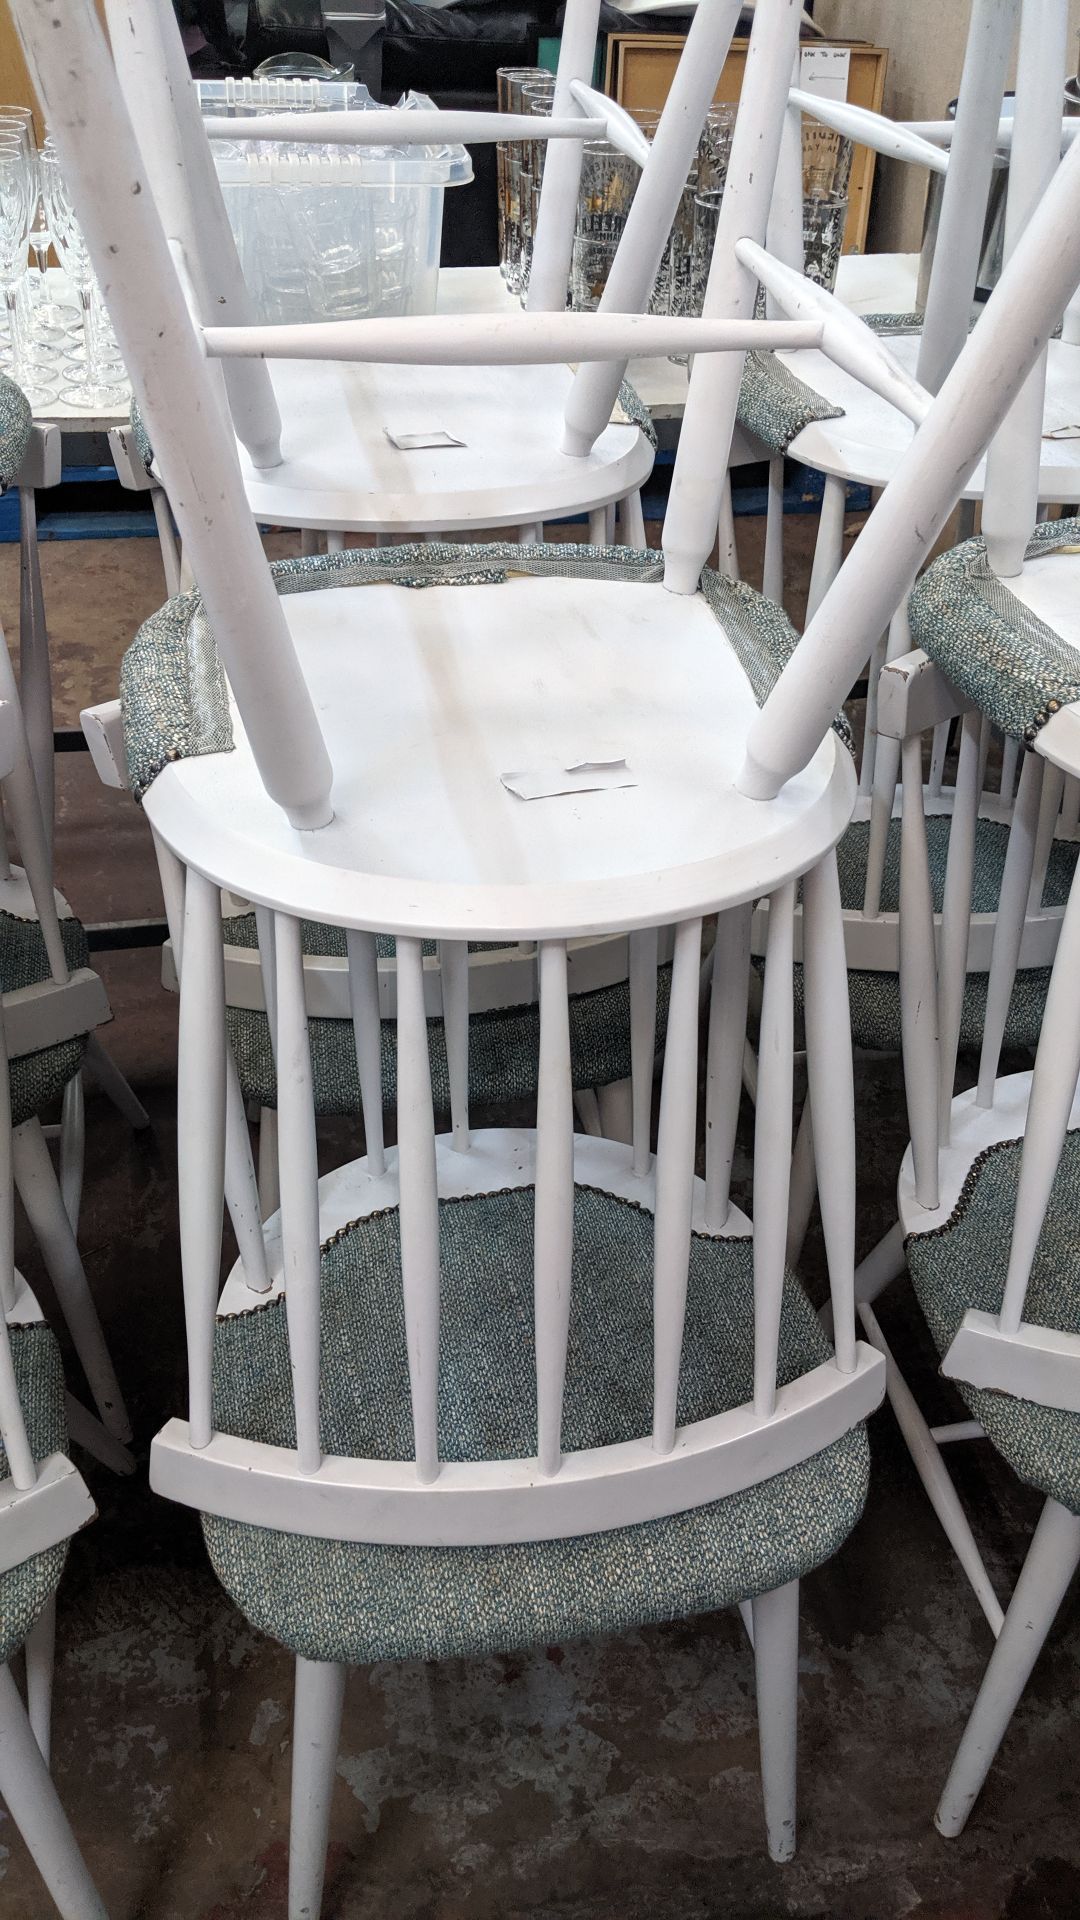 10 off matching upholstered wooden dining chairs. NB lots 126 - 128 consist of different - Image 7 of 7